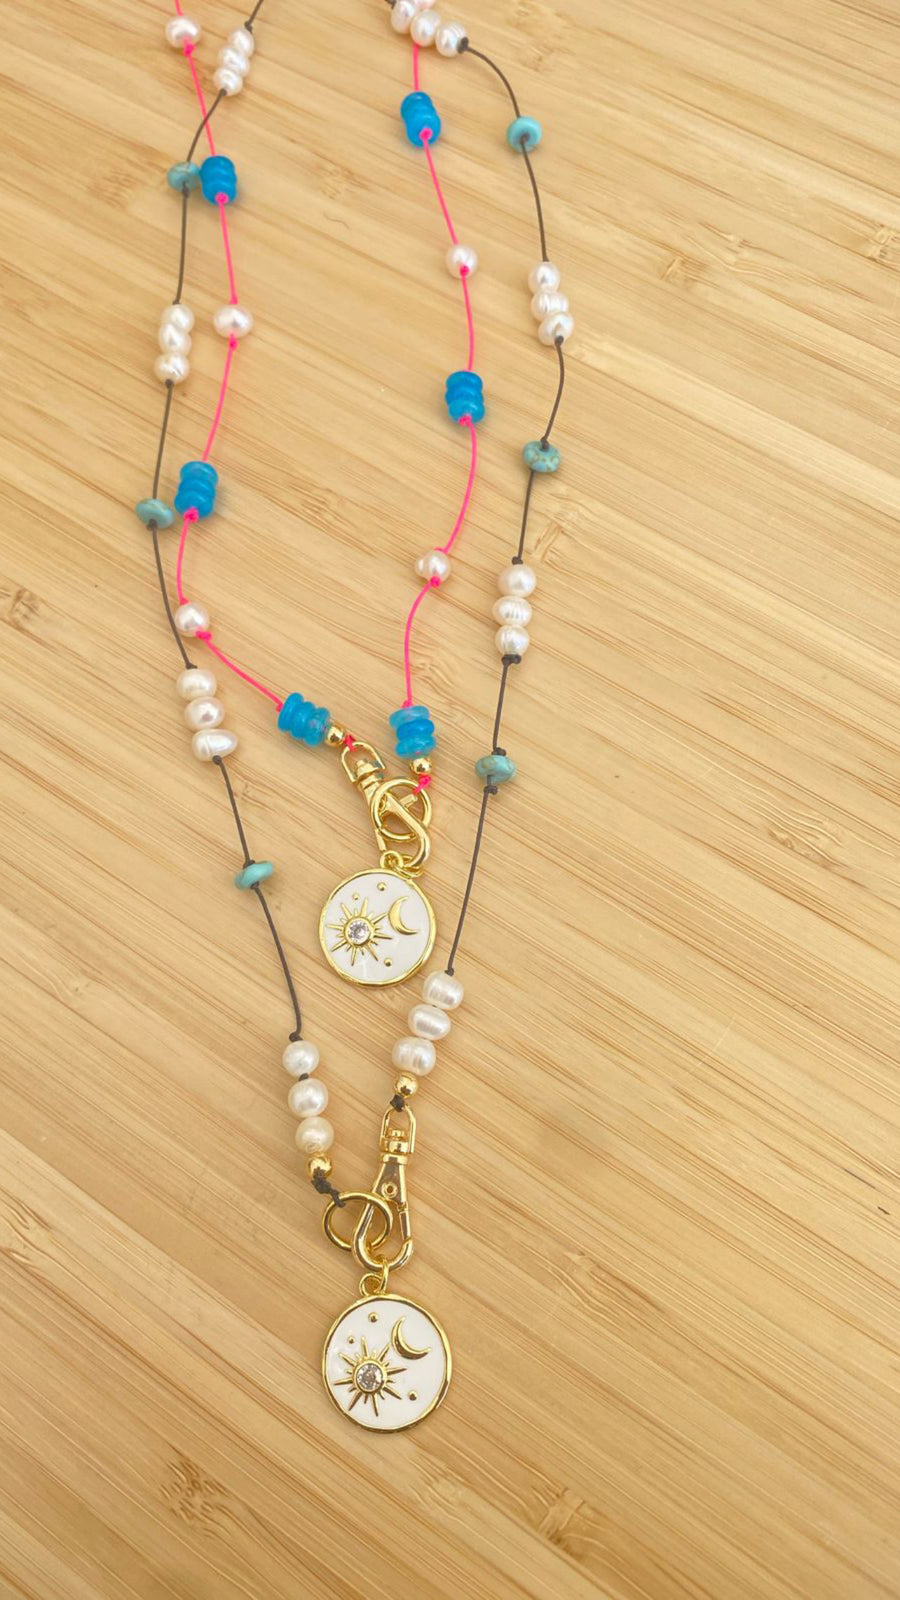 Summer necklace